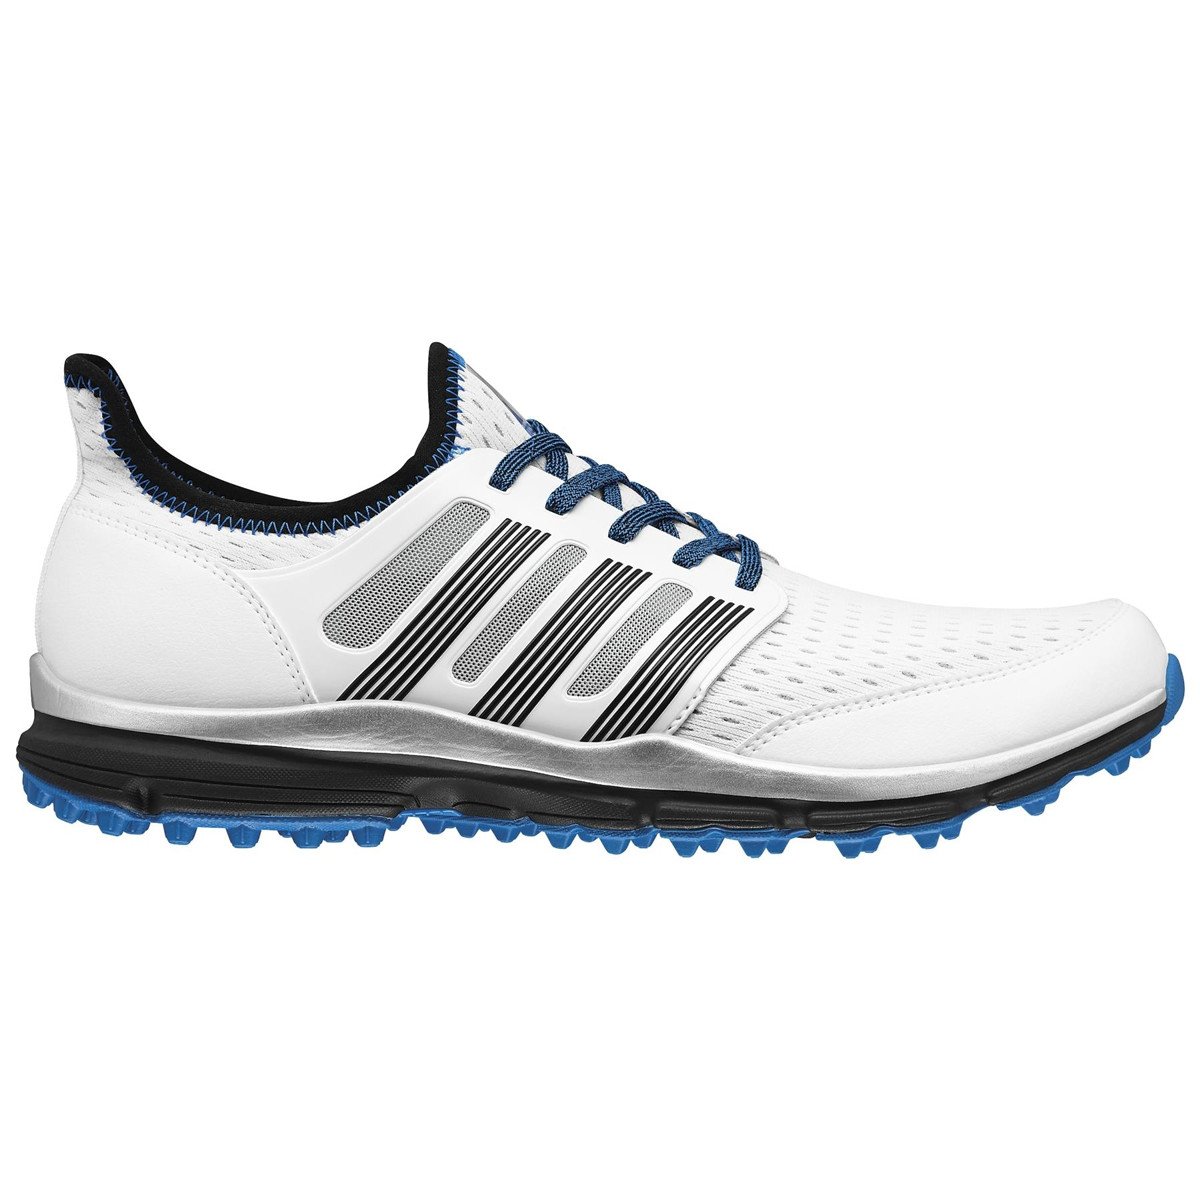 adidas climacool golf shoes 12